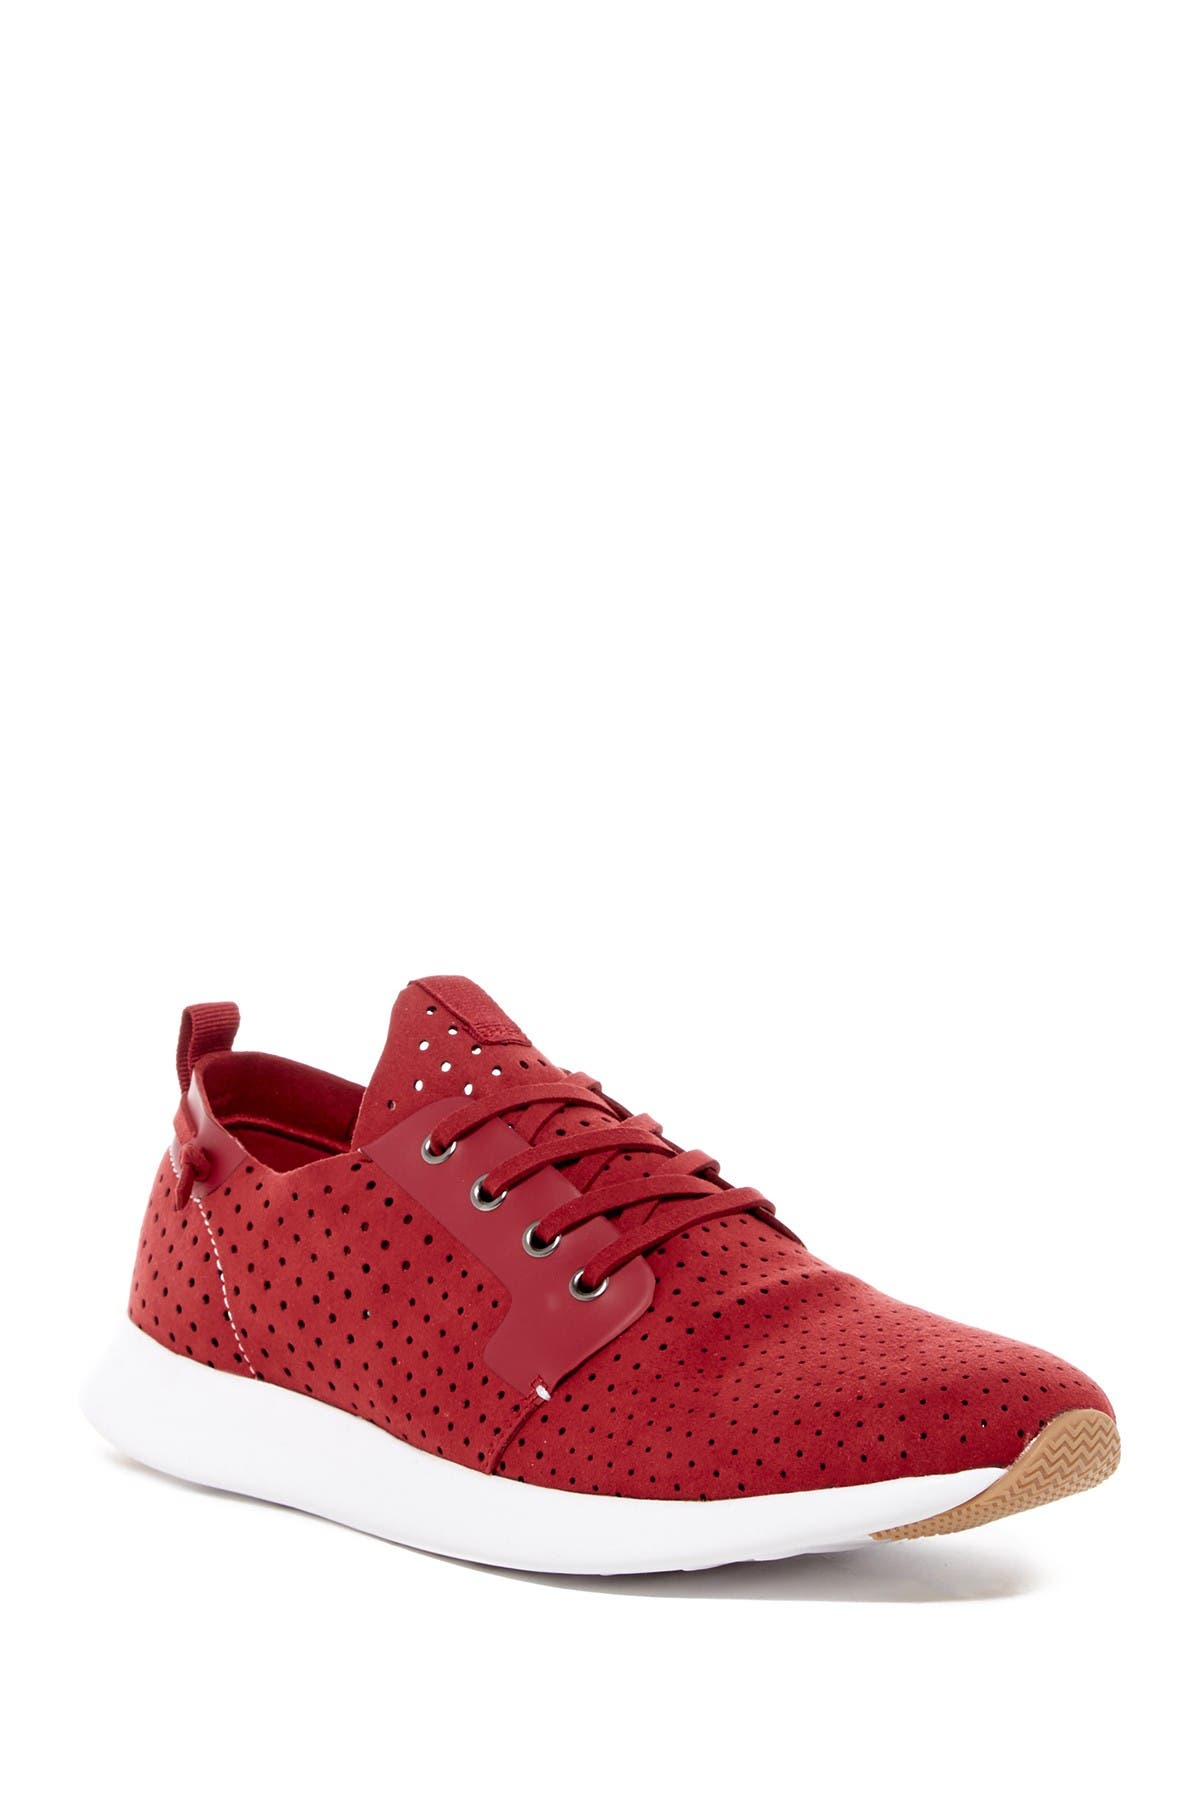 Steve Madden | Chyll Perforated Sneaker 